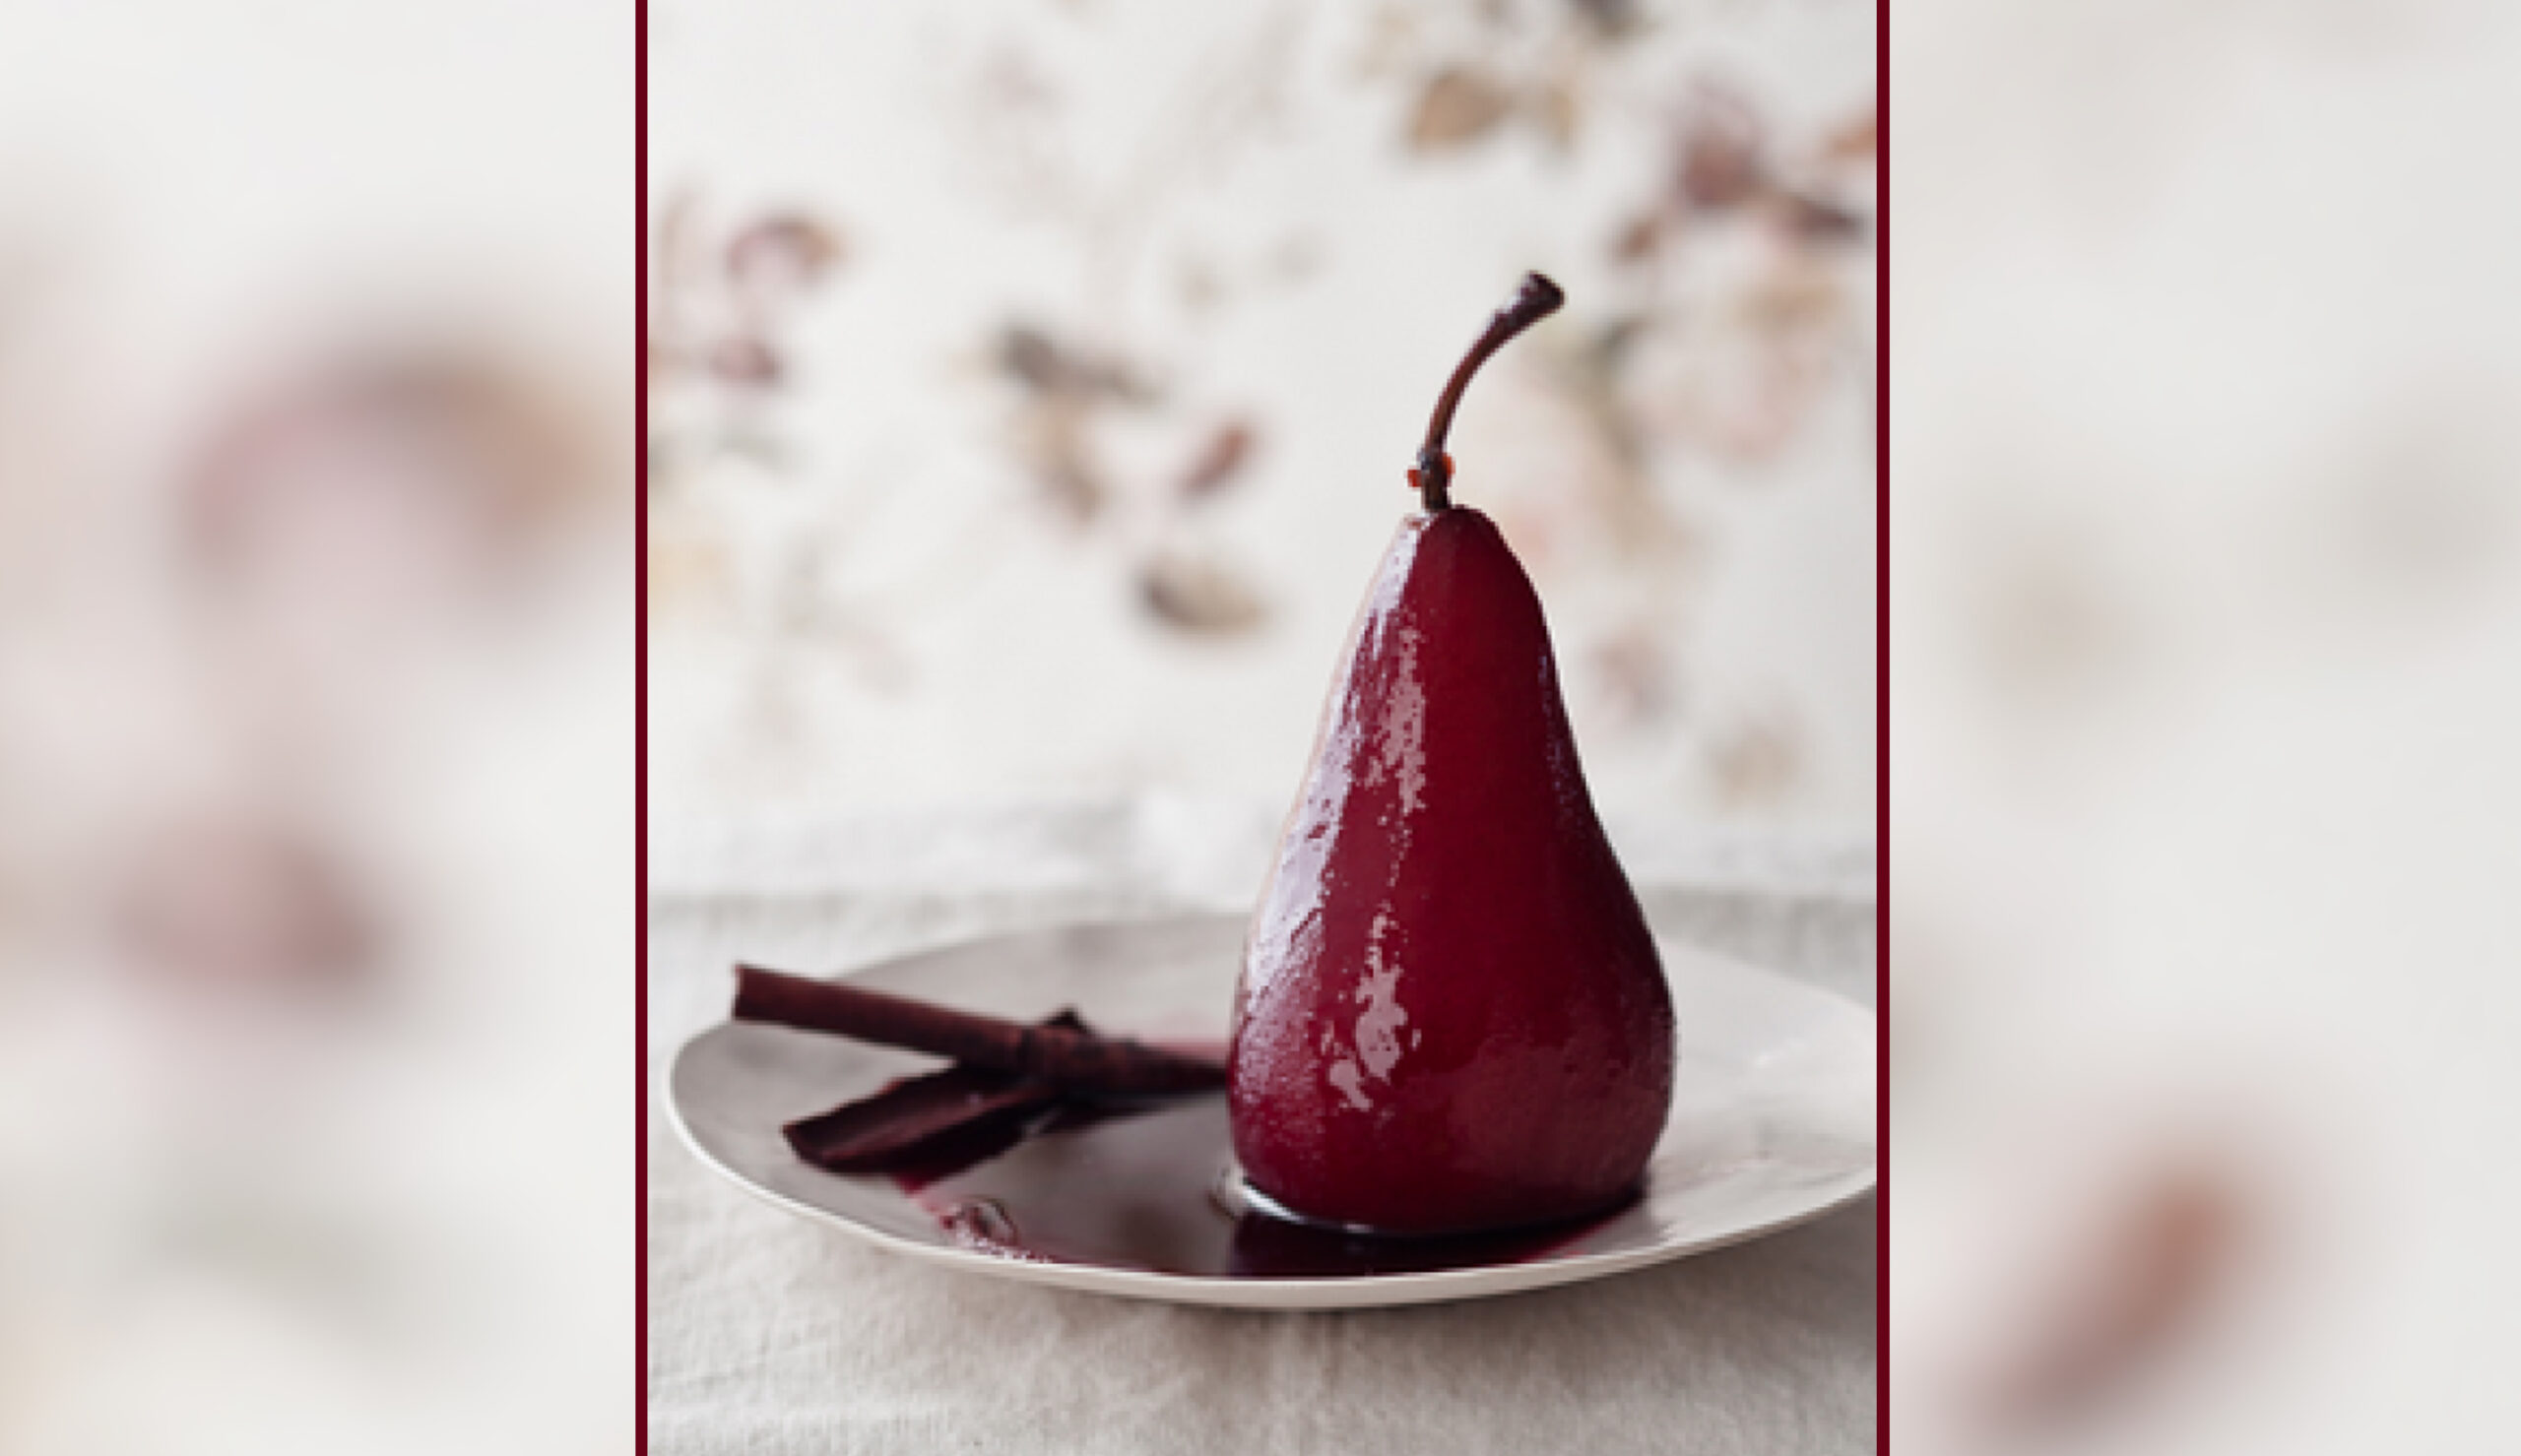  It’s Official: Poached Pears in Red Wine Are the Best Winter Dessert